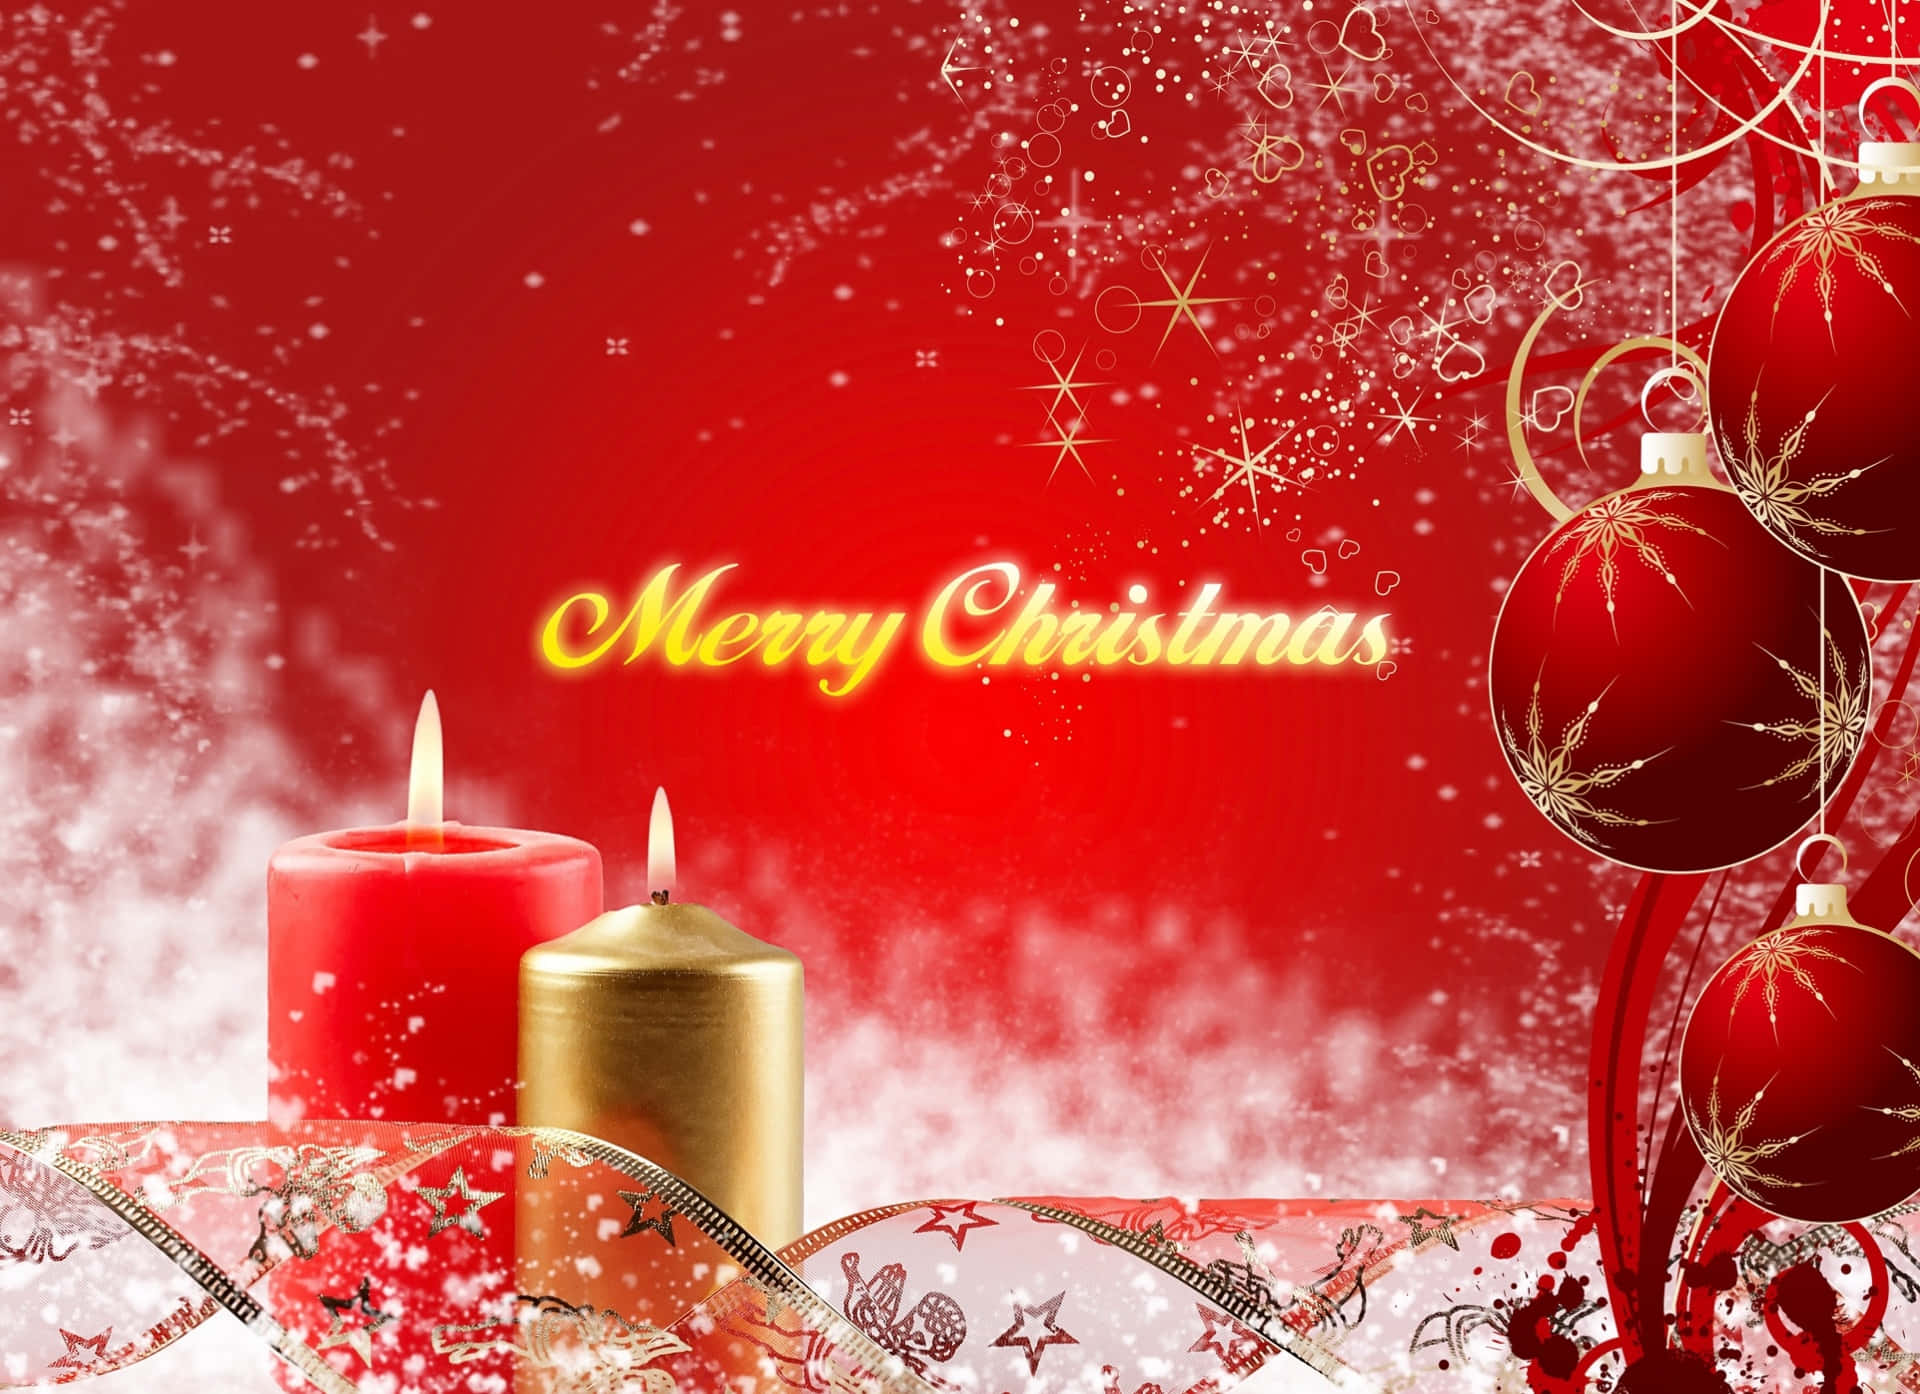 Christmas Wallpapers With Candles And Red Decorations